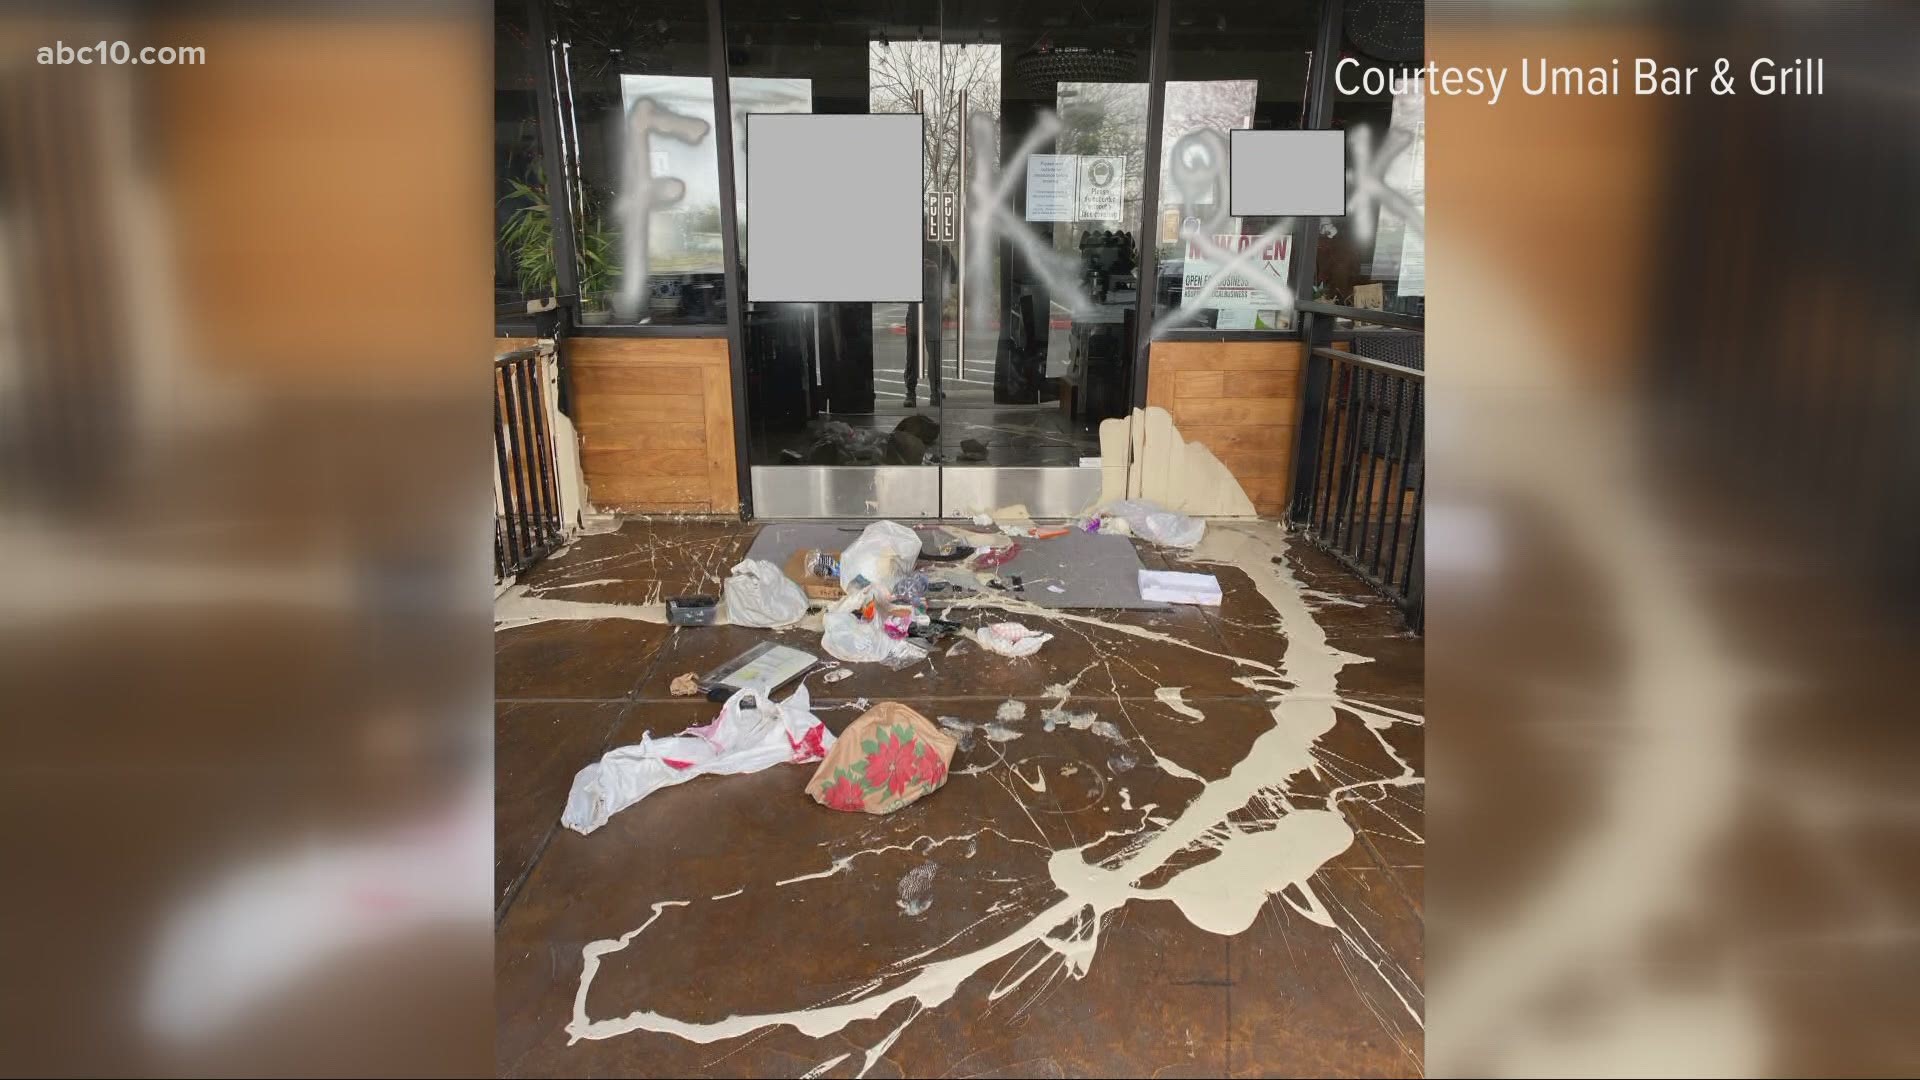 The owner of Umai Sushi Bar arrived at her restaurant Thursday morning to find the front windows of the business spray-painted with anti-Asian graffiti.